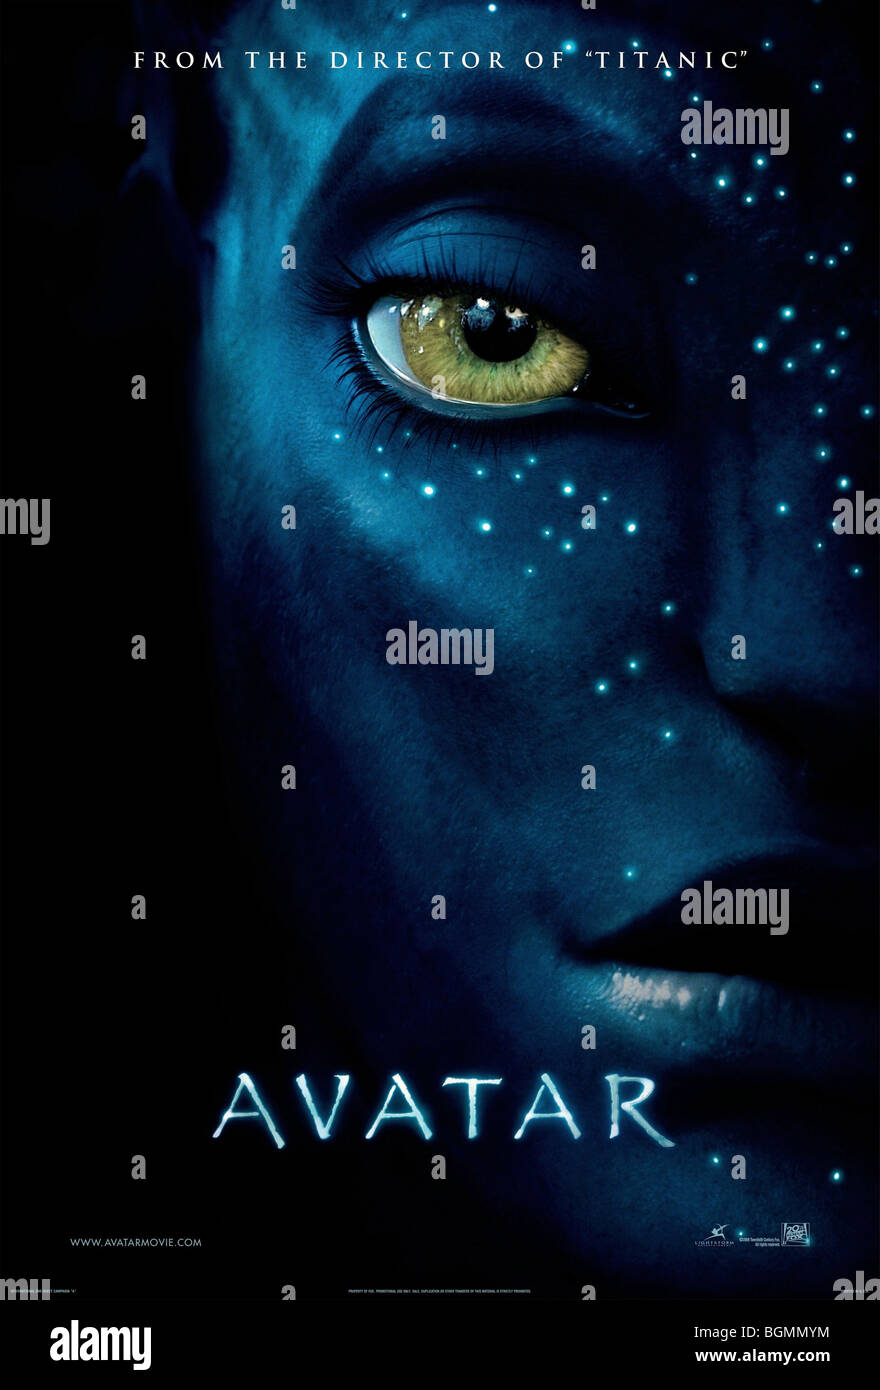 Avatar Movie Poster High Resolution Stock Photography and Images - Alamy